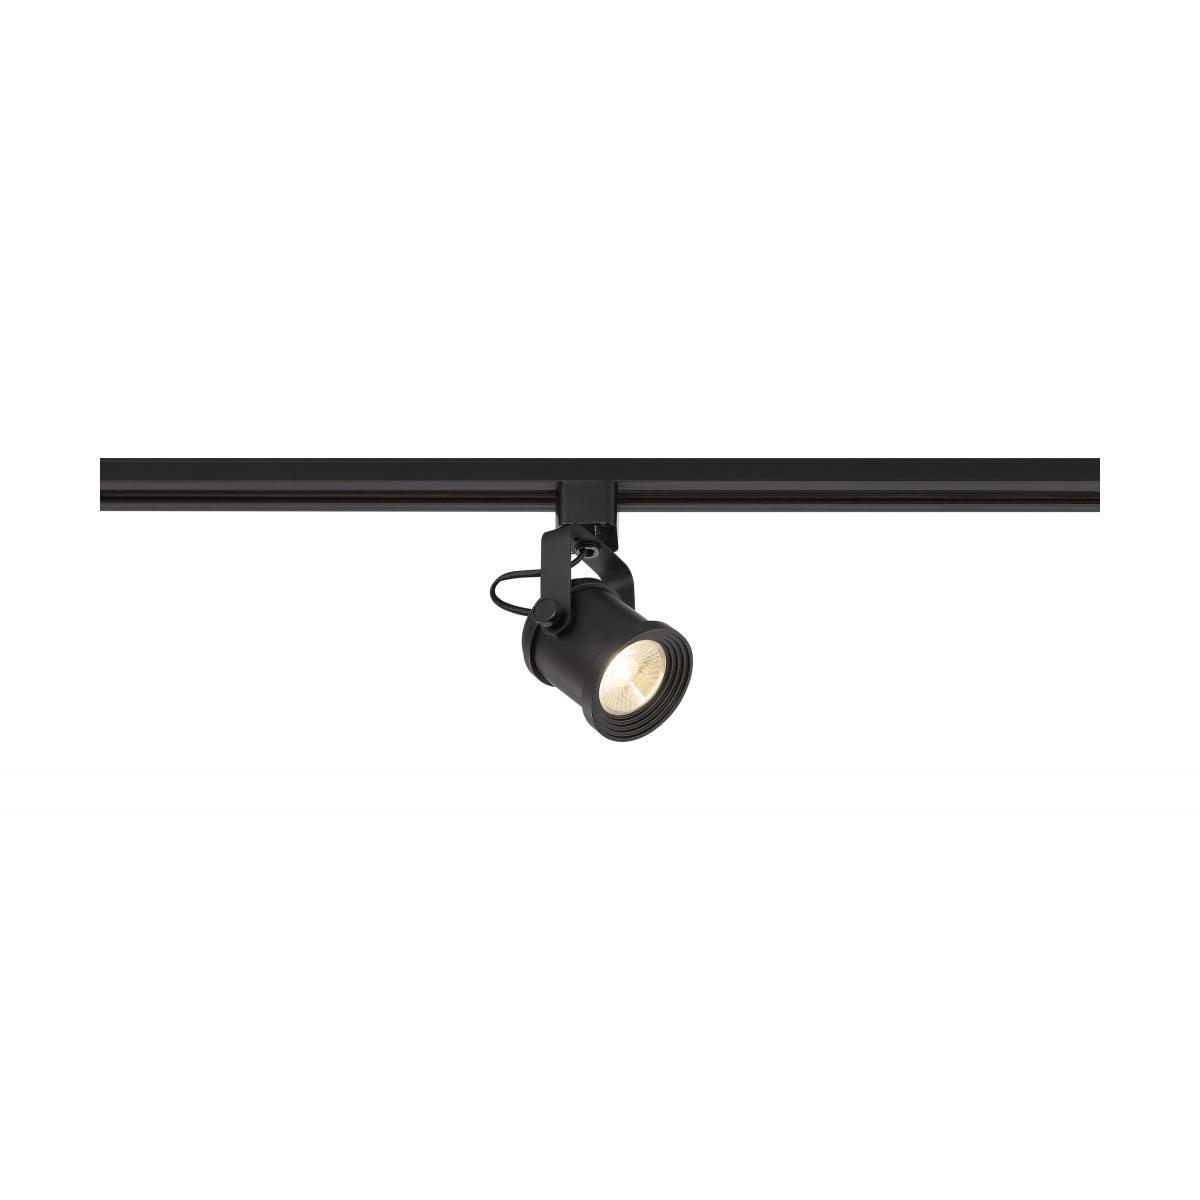 LED Forged Track Head, 12W, 1020 Lumens, 3000K, Halo (H) - Bees Lighting